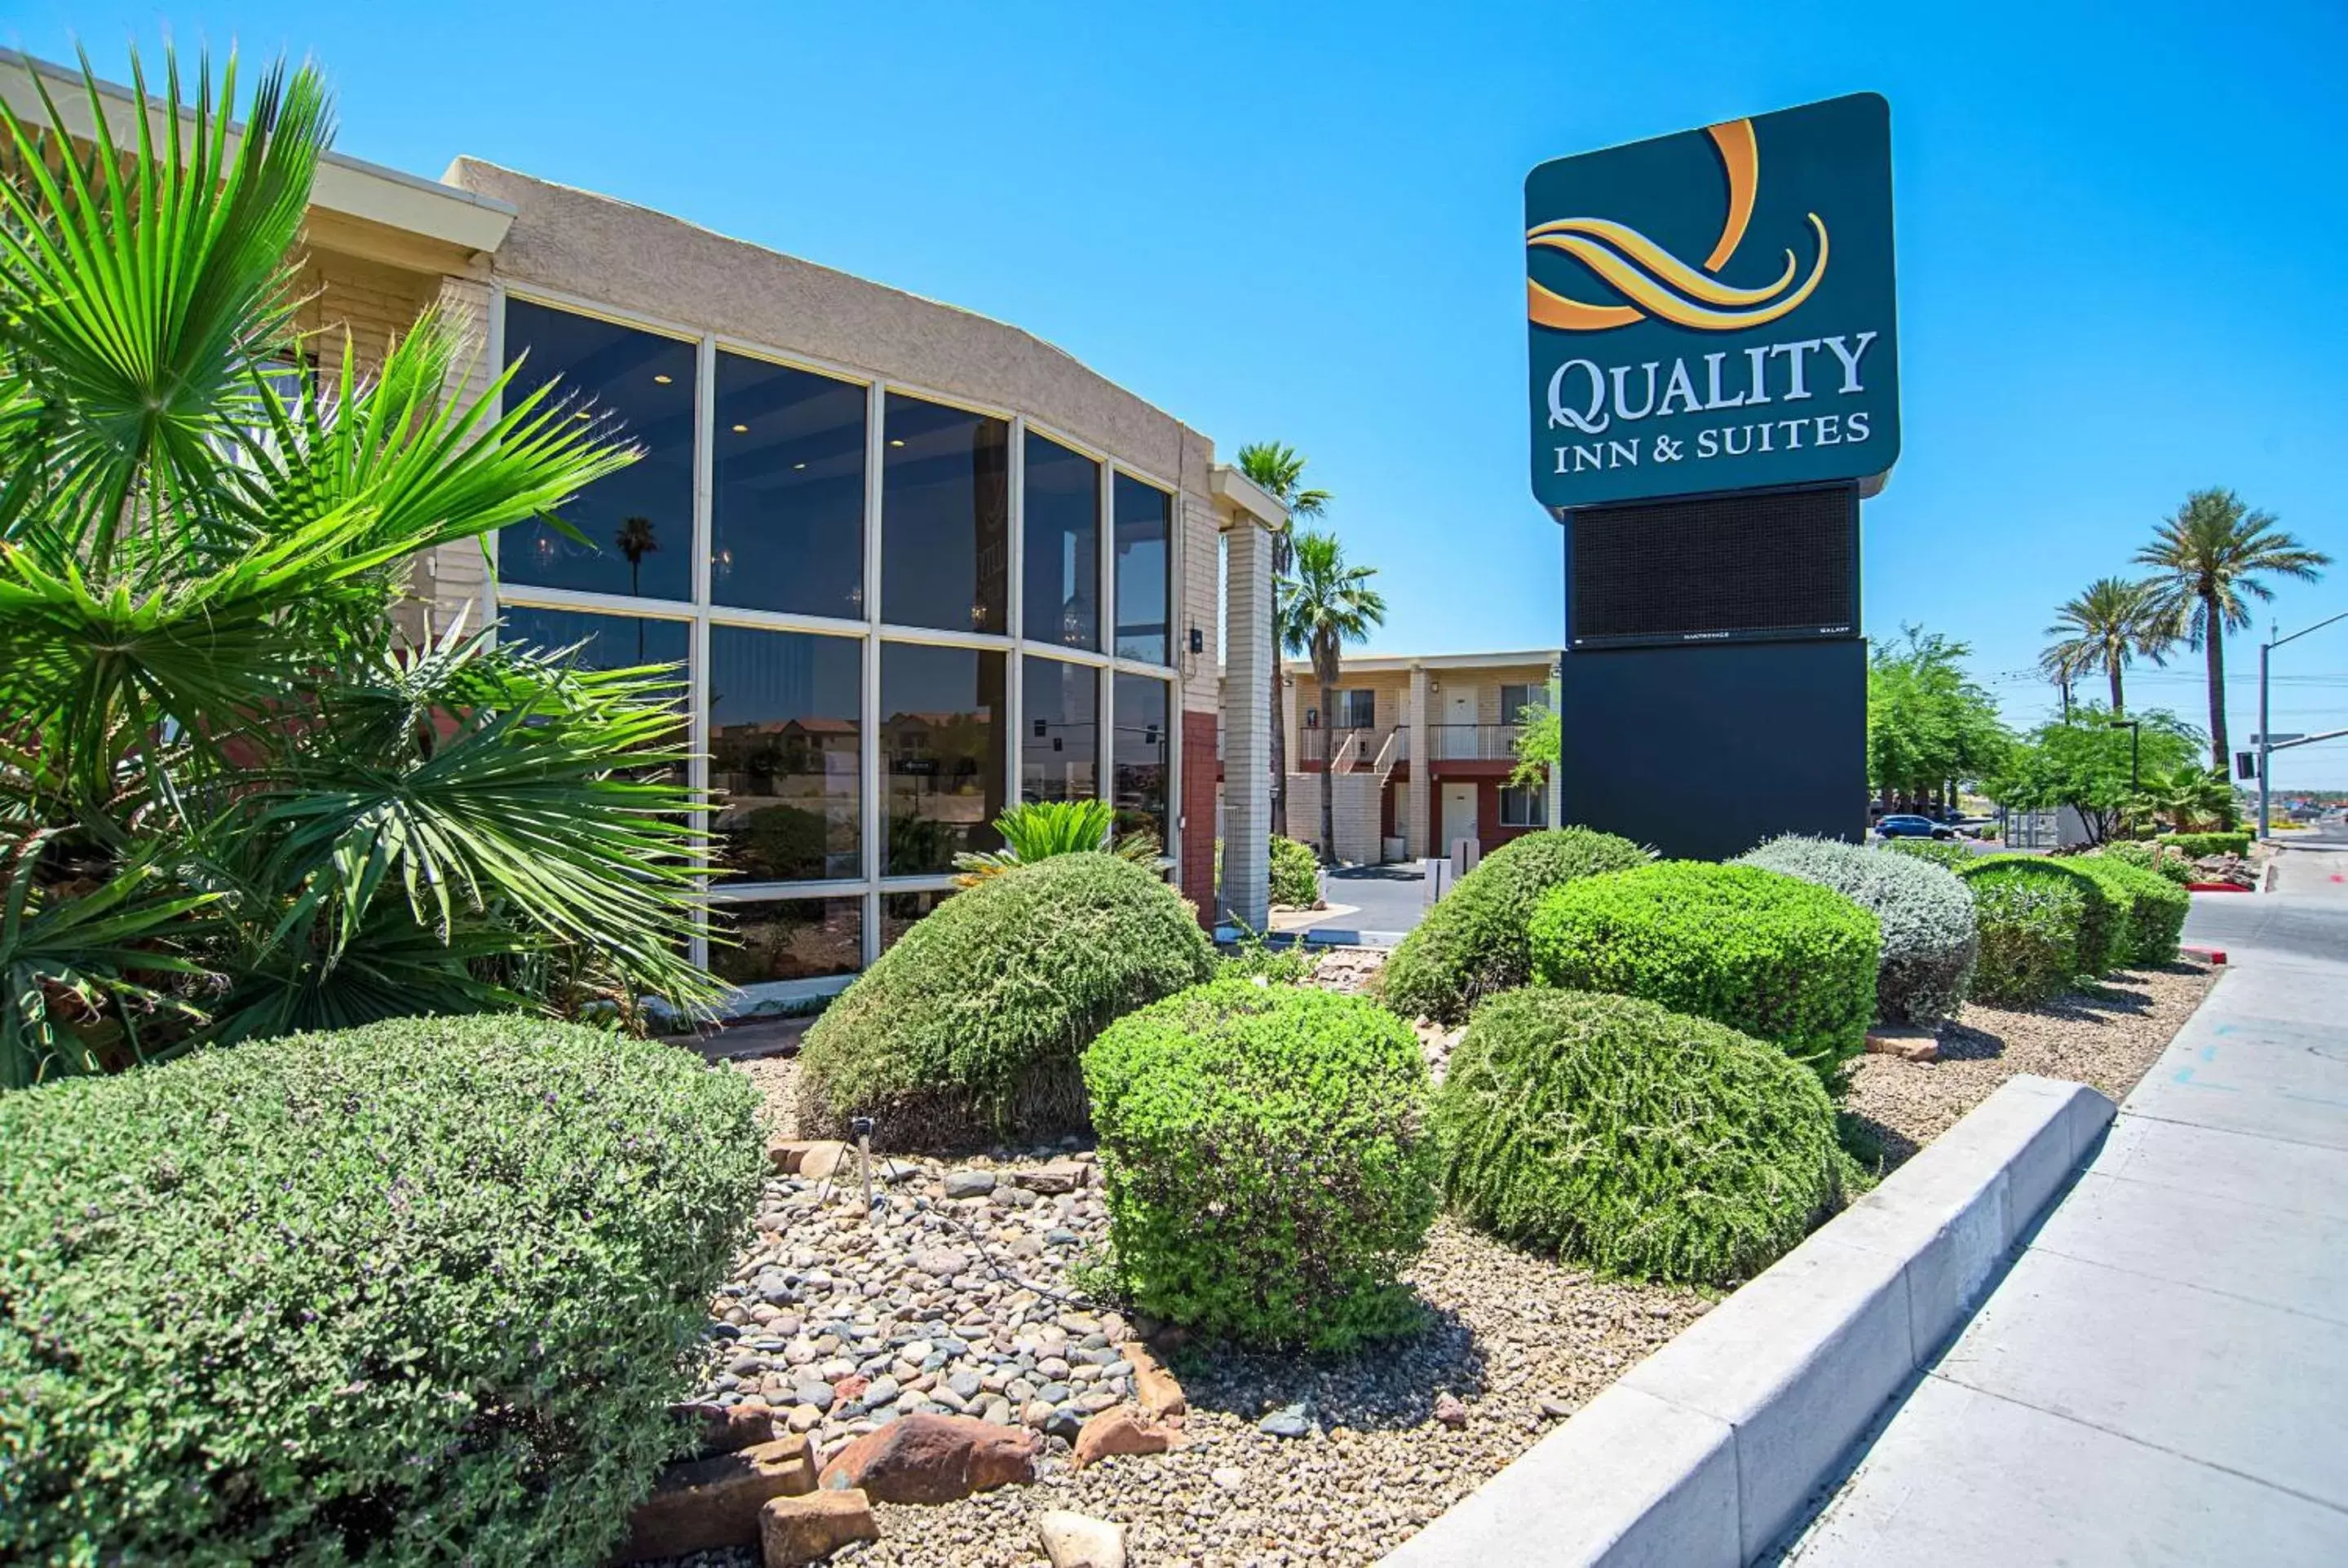 Property building in Quality Inn & Suites Phoenix NW - Sun City